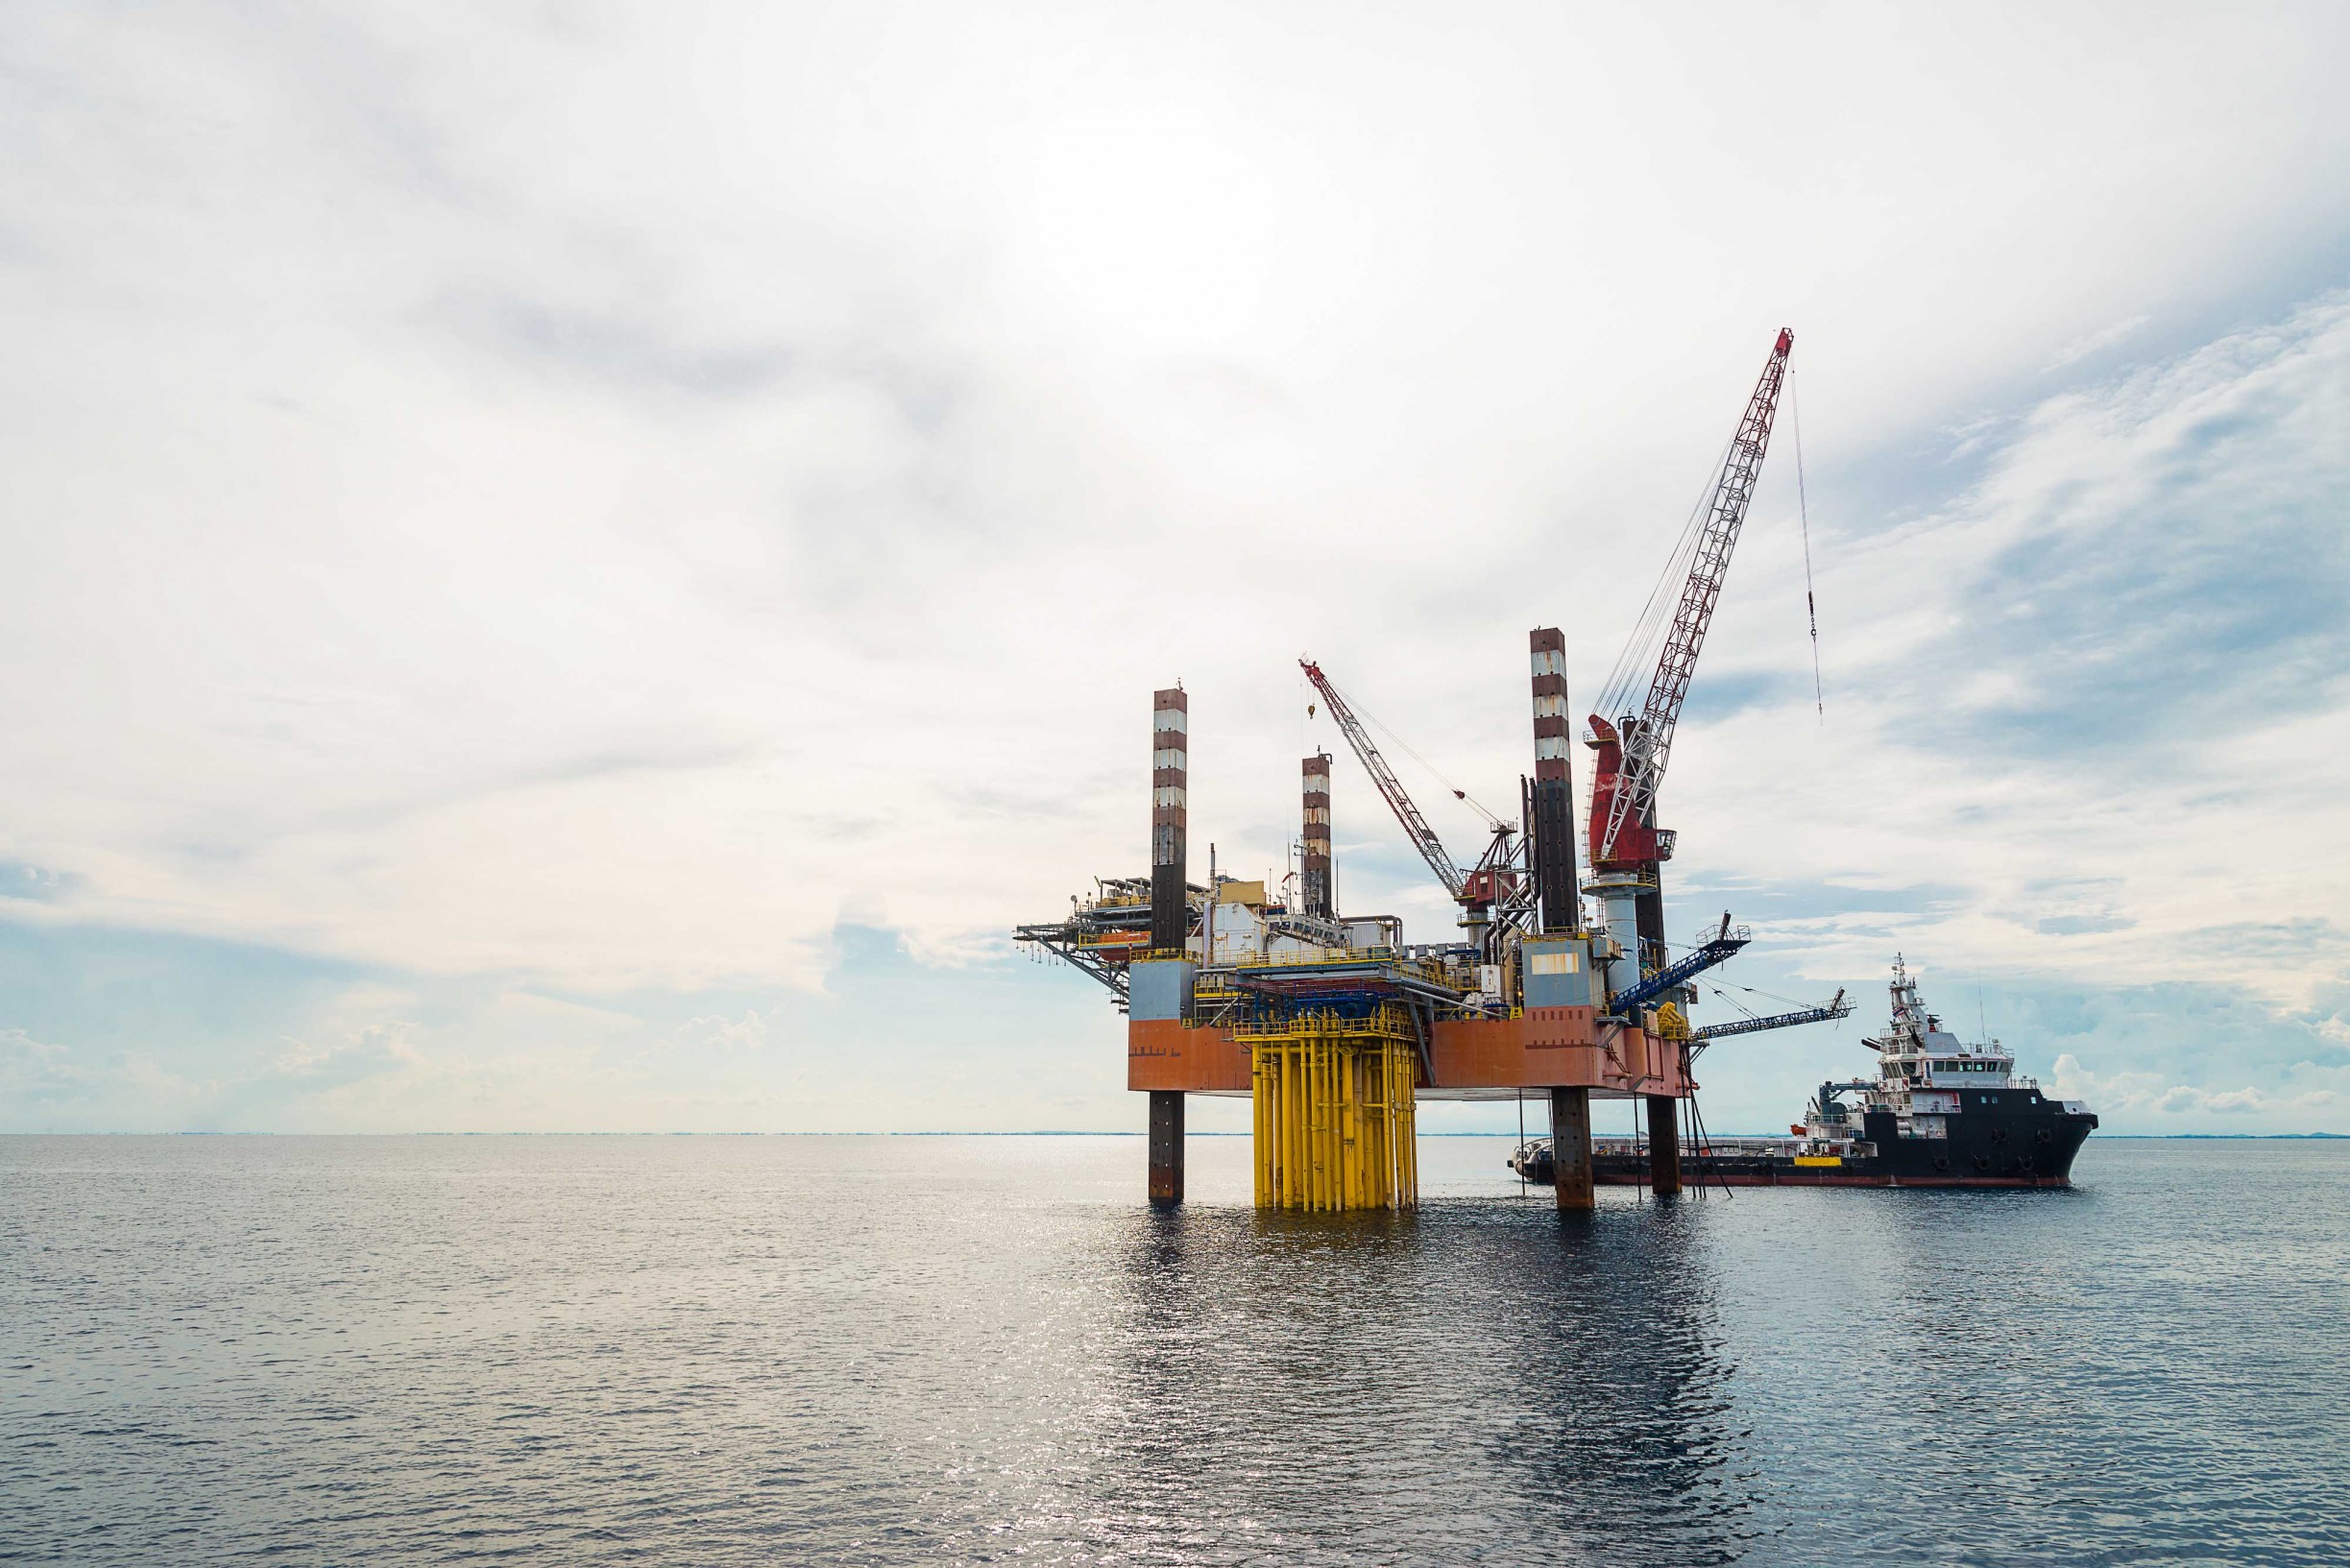 Offshore oil and gas processing platform